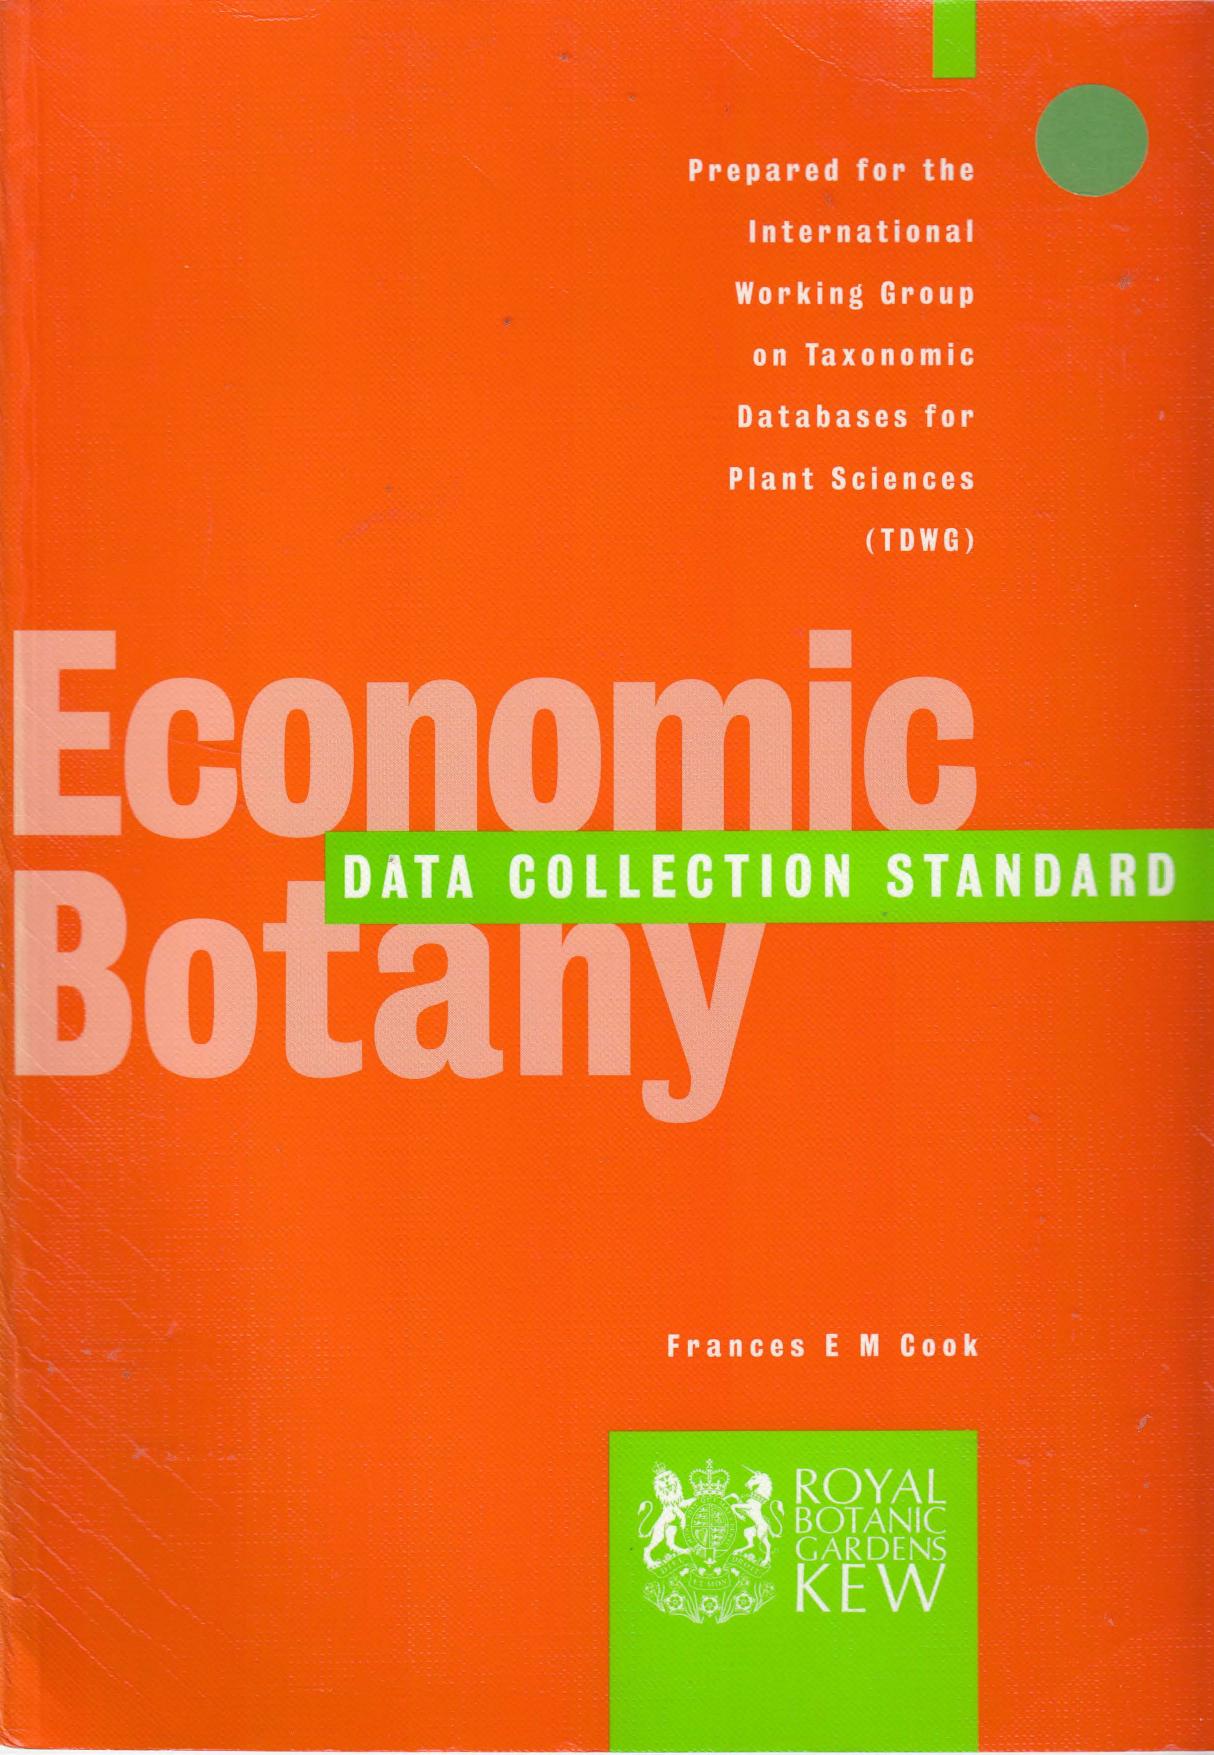 Economic Botany Data Collection Standard by F.E.M. Cook 1995